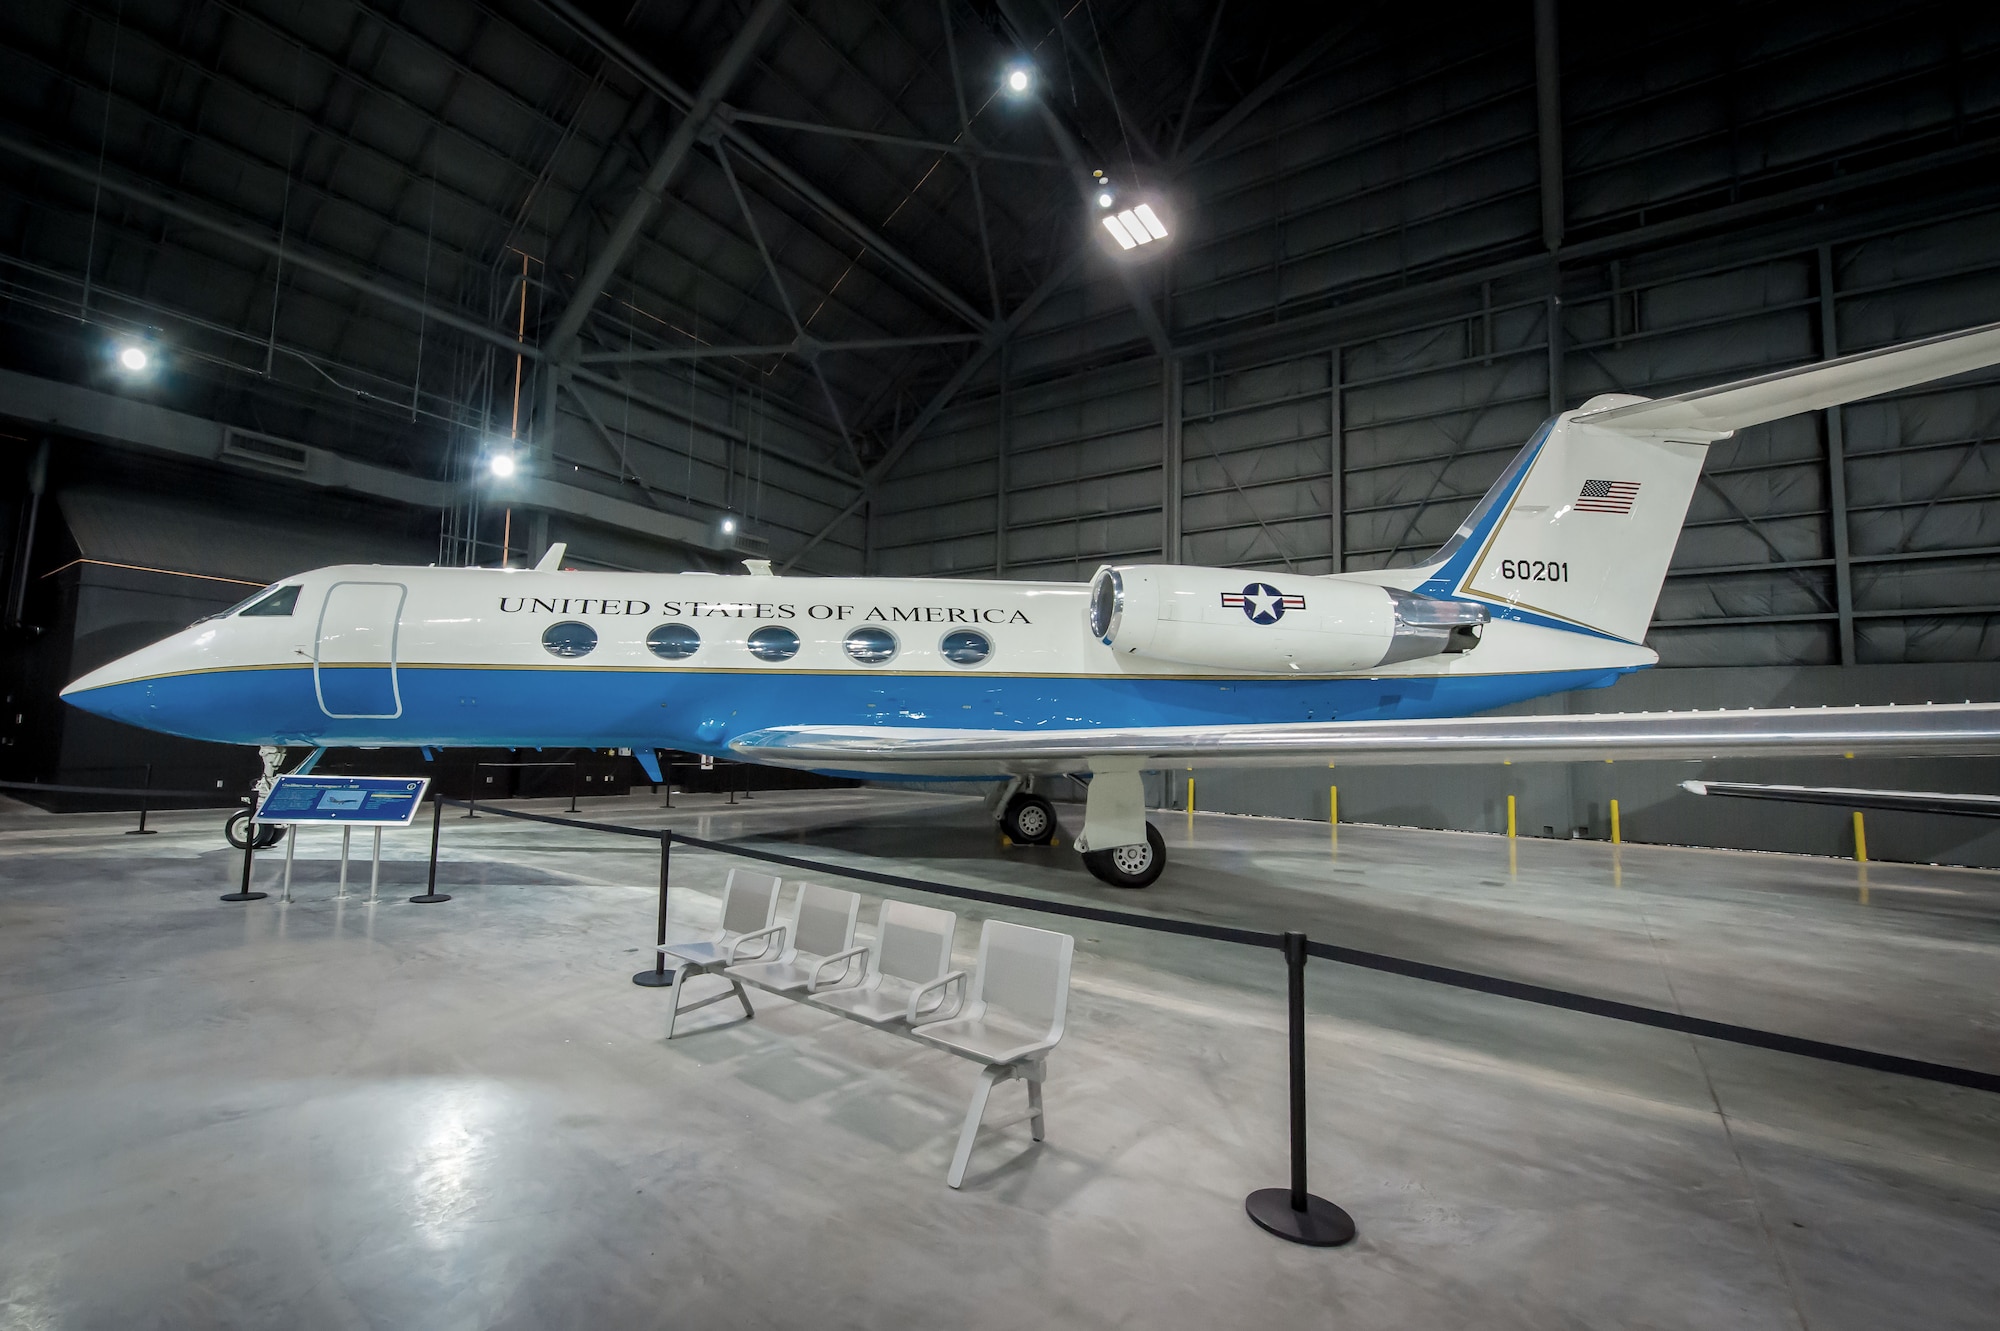 DAYTON, Ohio -- Gulfstream Aerospace C-20B in the Presidential Gallery at the National Museum of the United States Air Force. (U.S. Air Force photo by Jim Copes)
